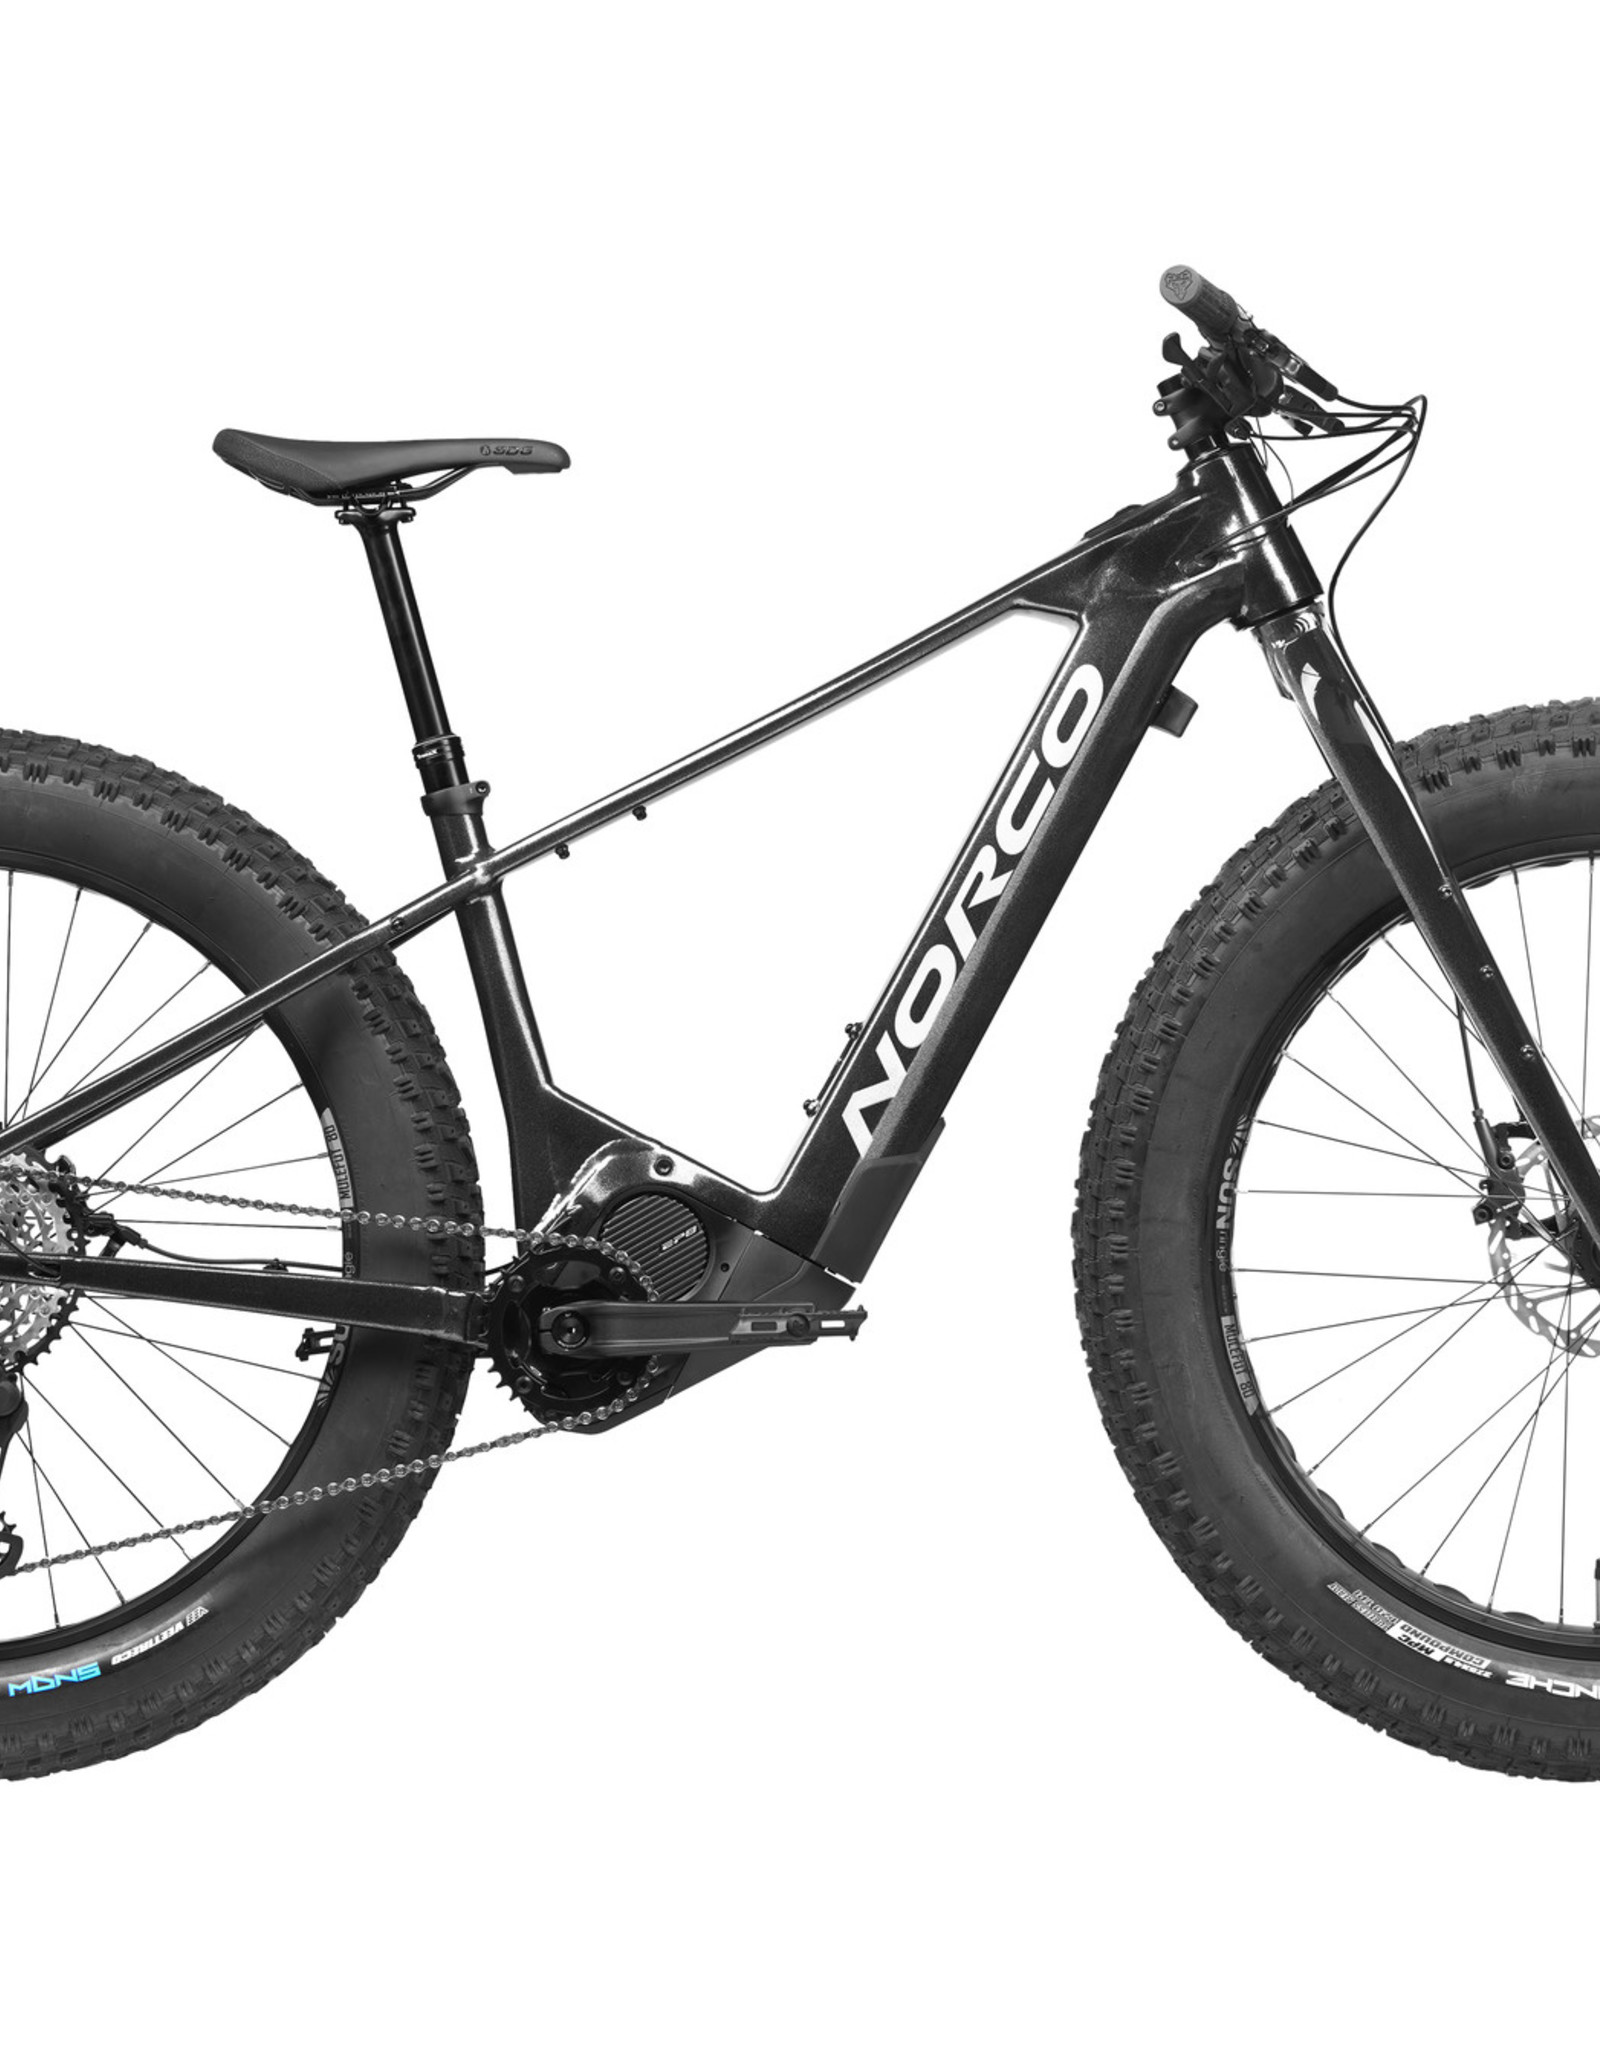 NORCO Norco Bigfoot VLT 2  XL27 Black/Silver 32km (BATTERY NOT INCLUDED)